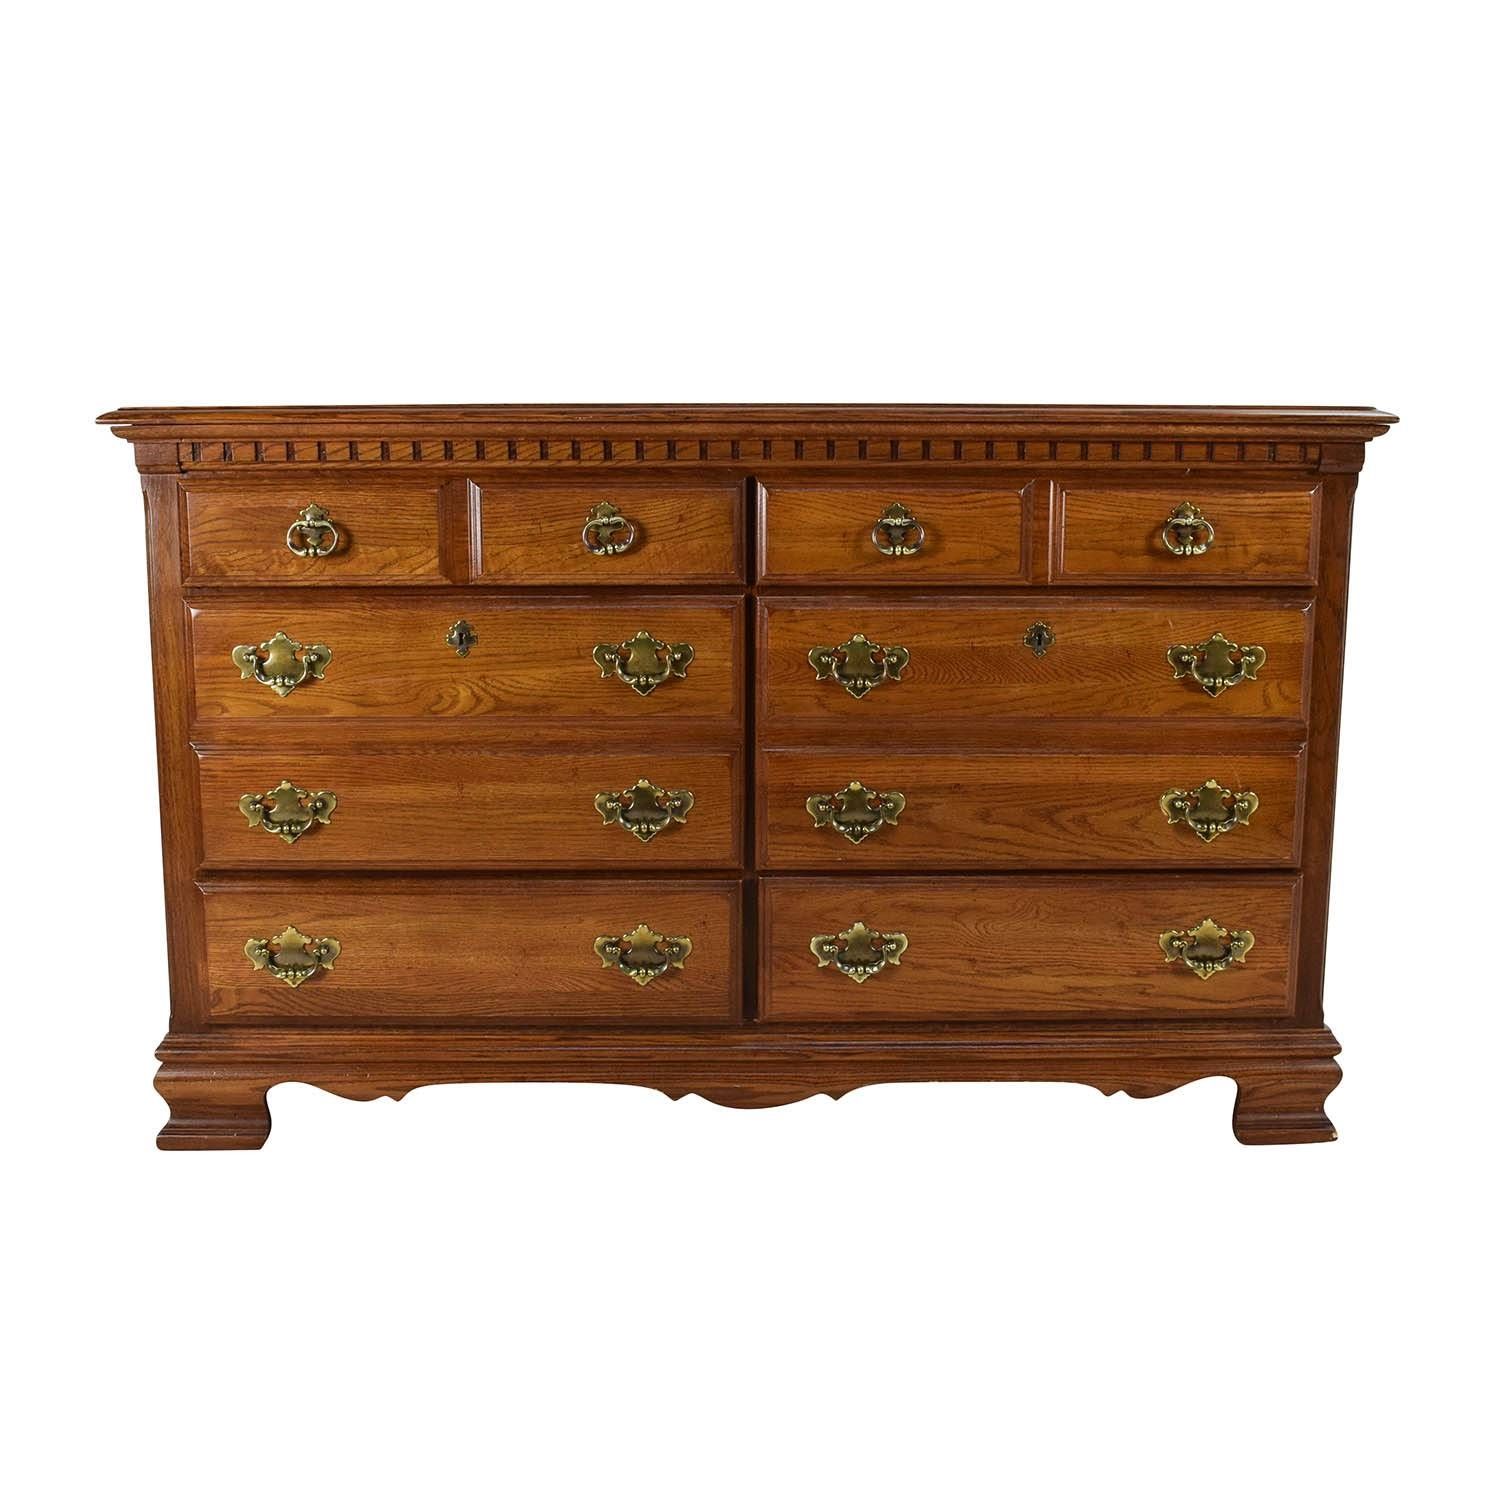 64% Off – Kincaid Furniture Kincaid Furniture Solid Wood Dresser Throughout 2018 Second Hand Dressers And Sideboards (View 8 of 15)